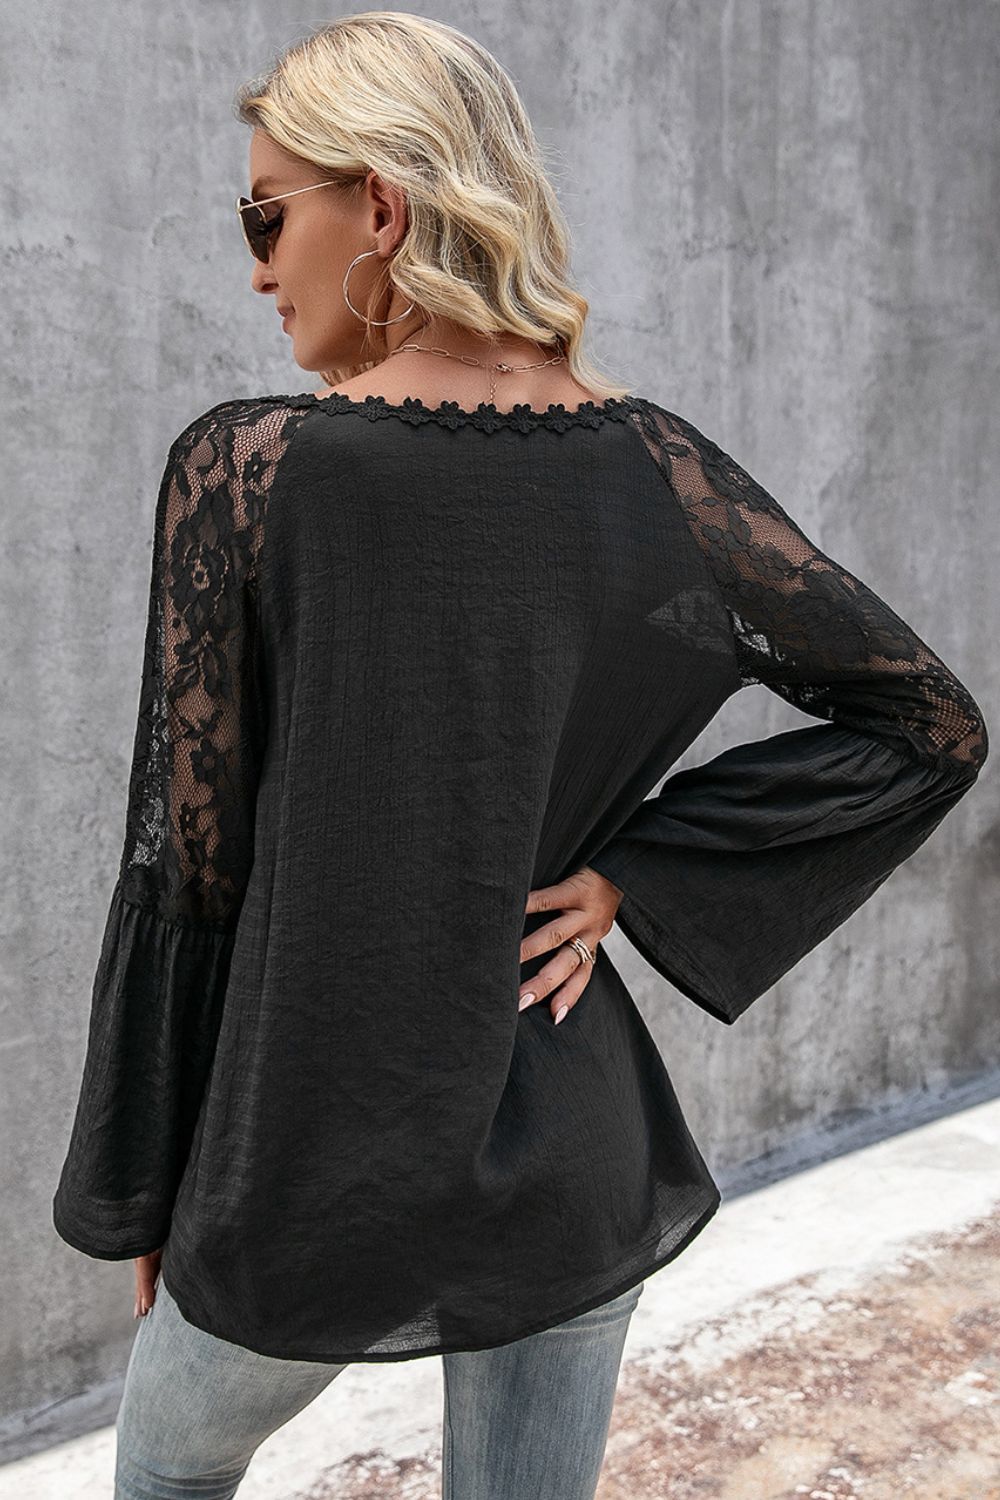 V-Neck Spliced Lace Flare Sleeve Top.